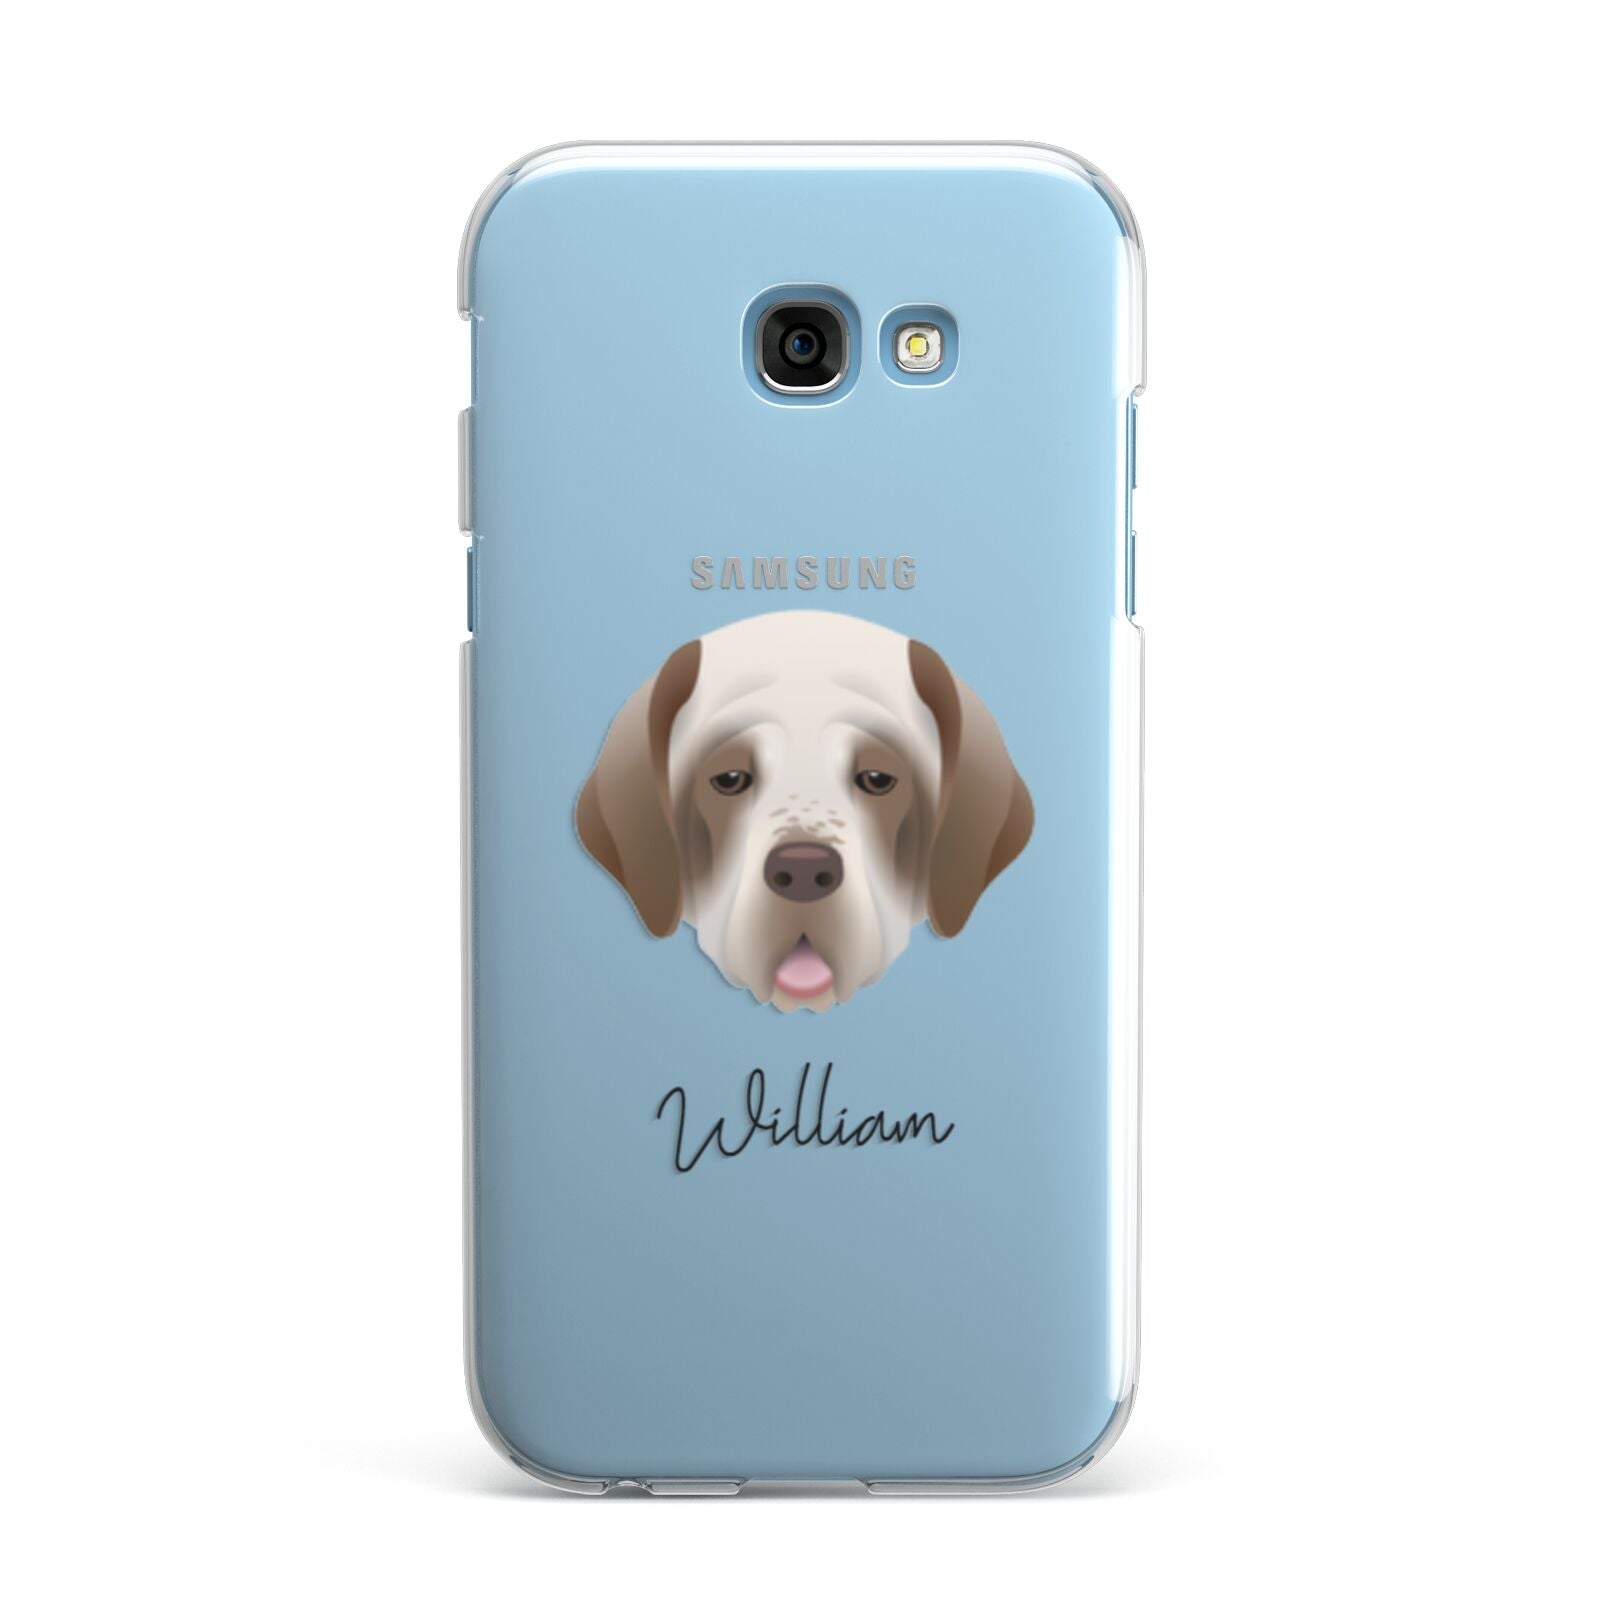 Clumber Spaniel Personalised Samsung Galaxy A7 2017 Case